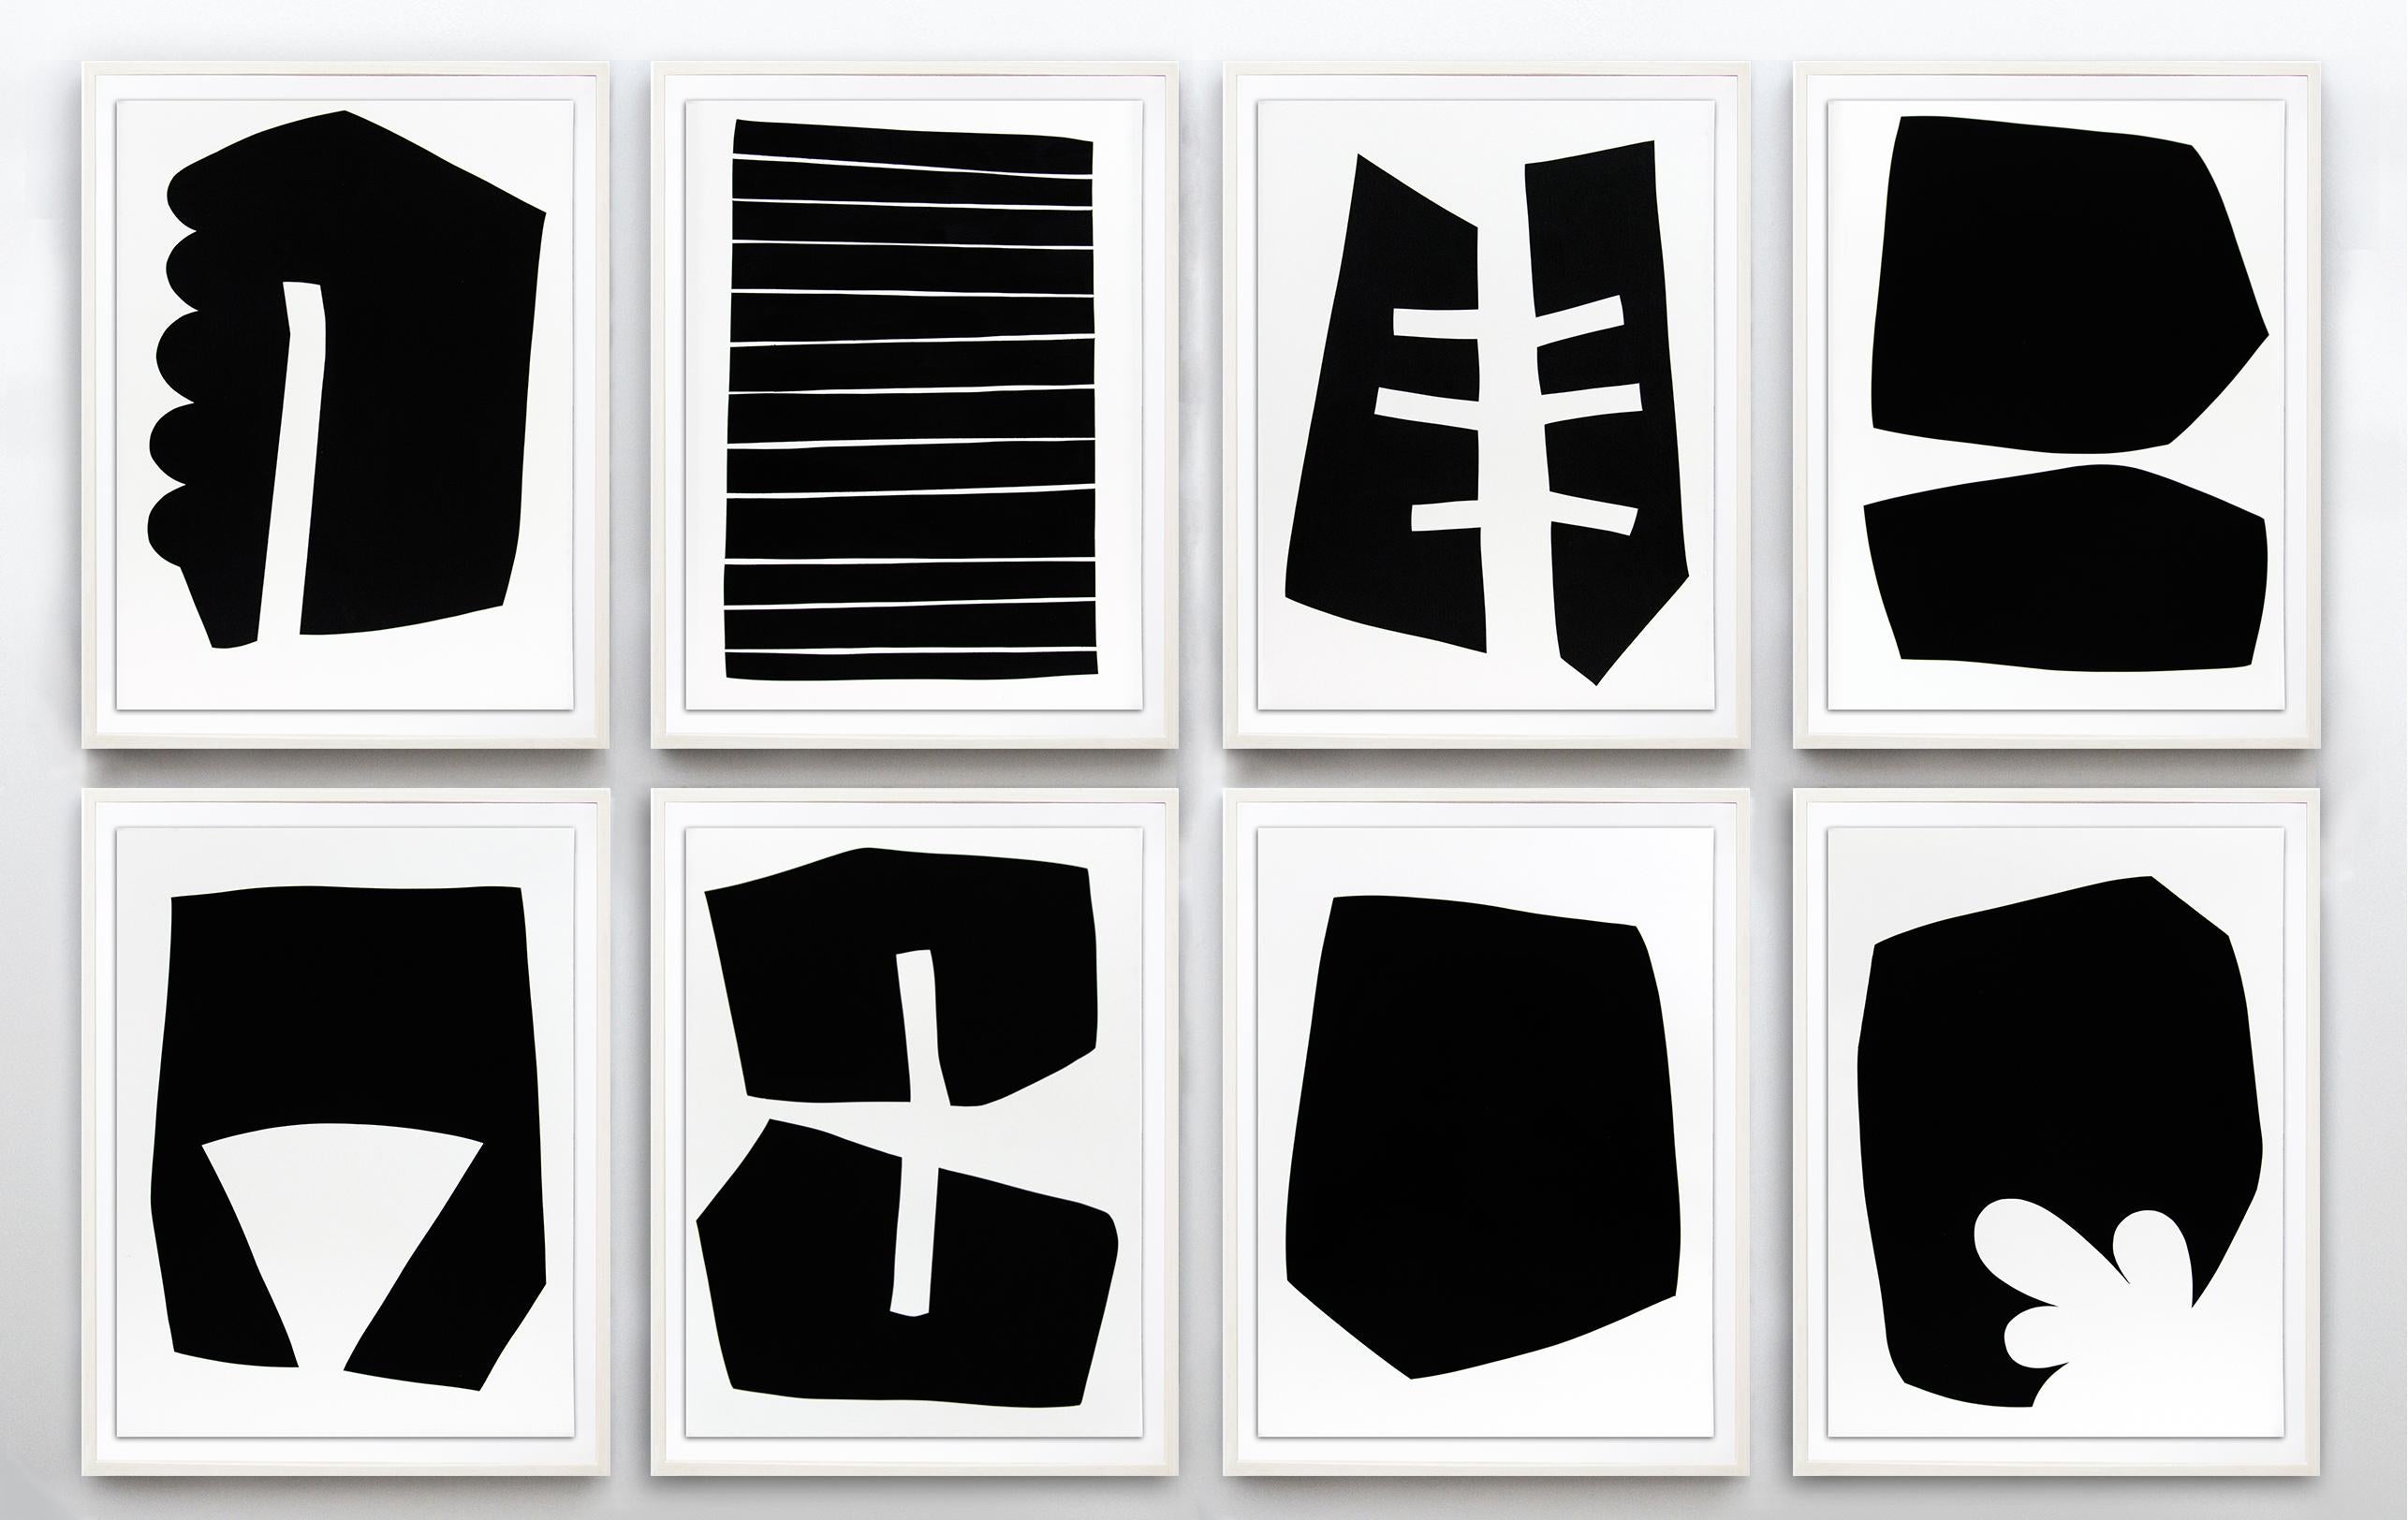 Suite of Eight Prints (Edition 9/20) - series of abstract shapes on paper